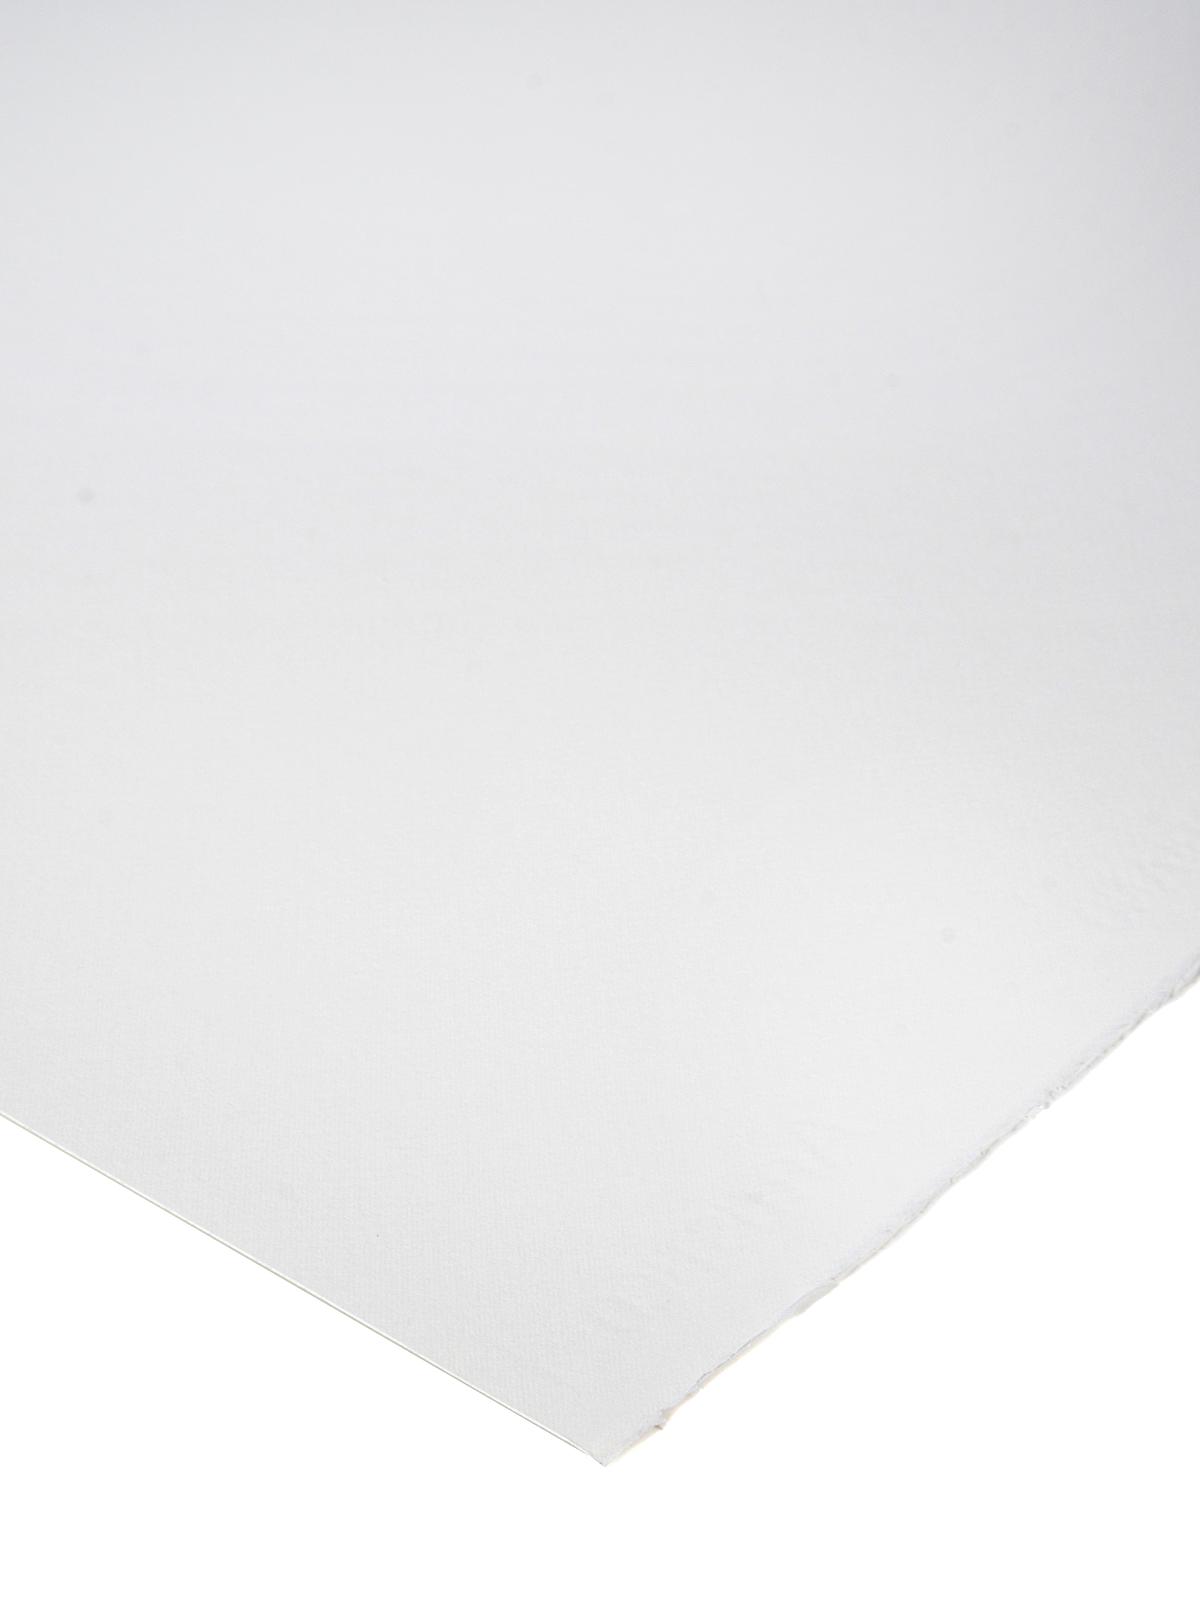 Artistico Watercolor Paper Traditional White 300 Gsm Rough 22 In. X 30 In.